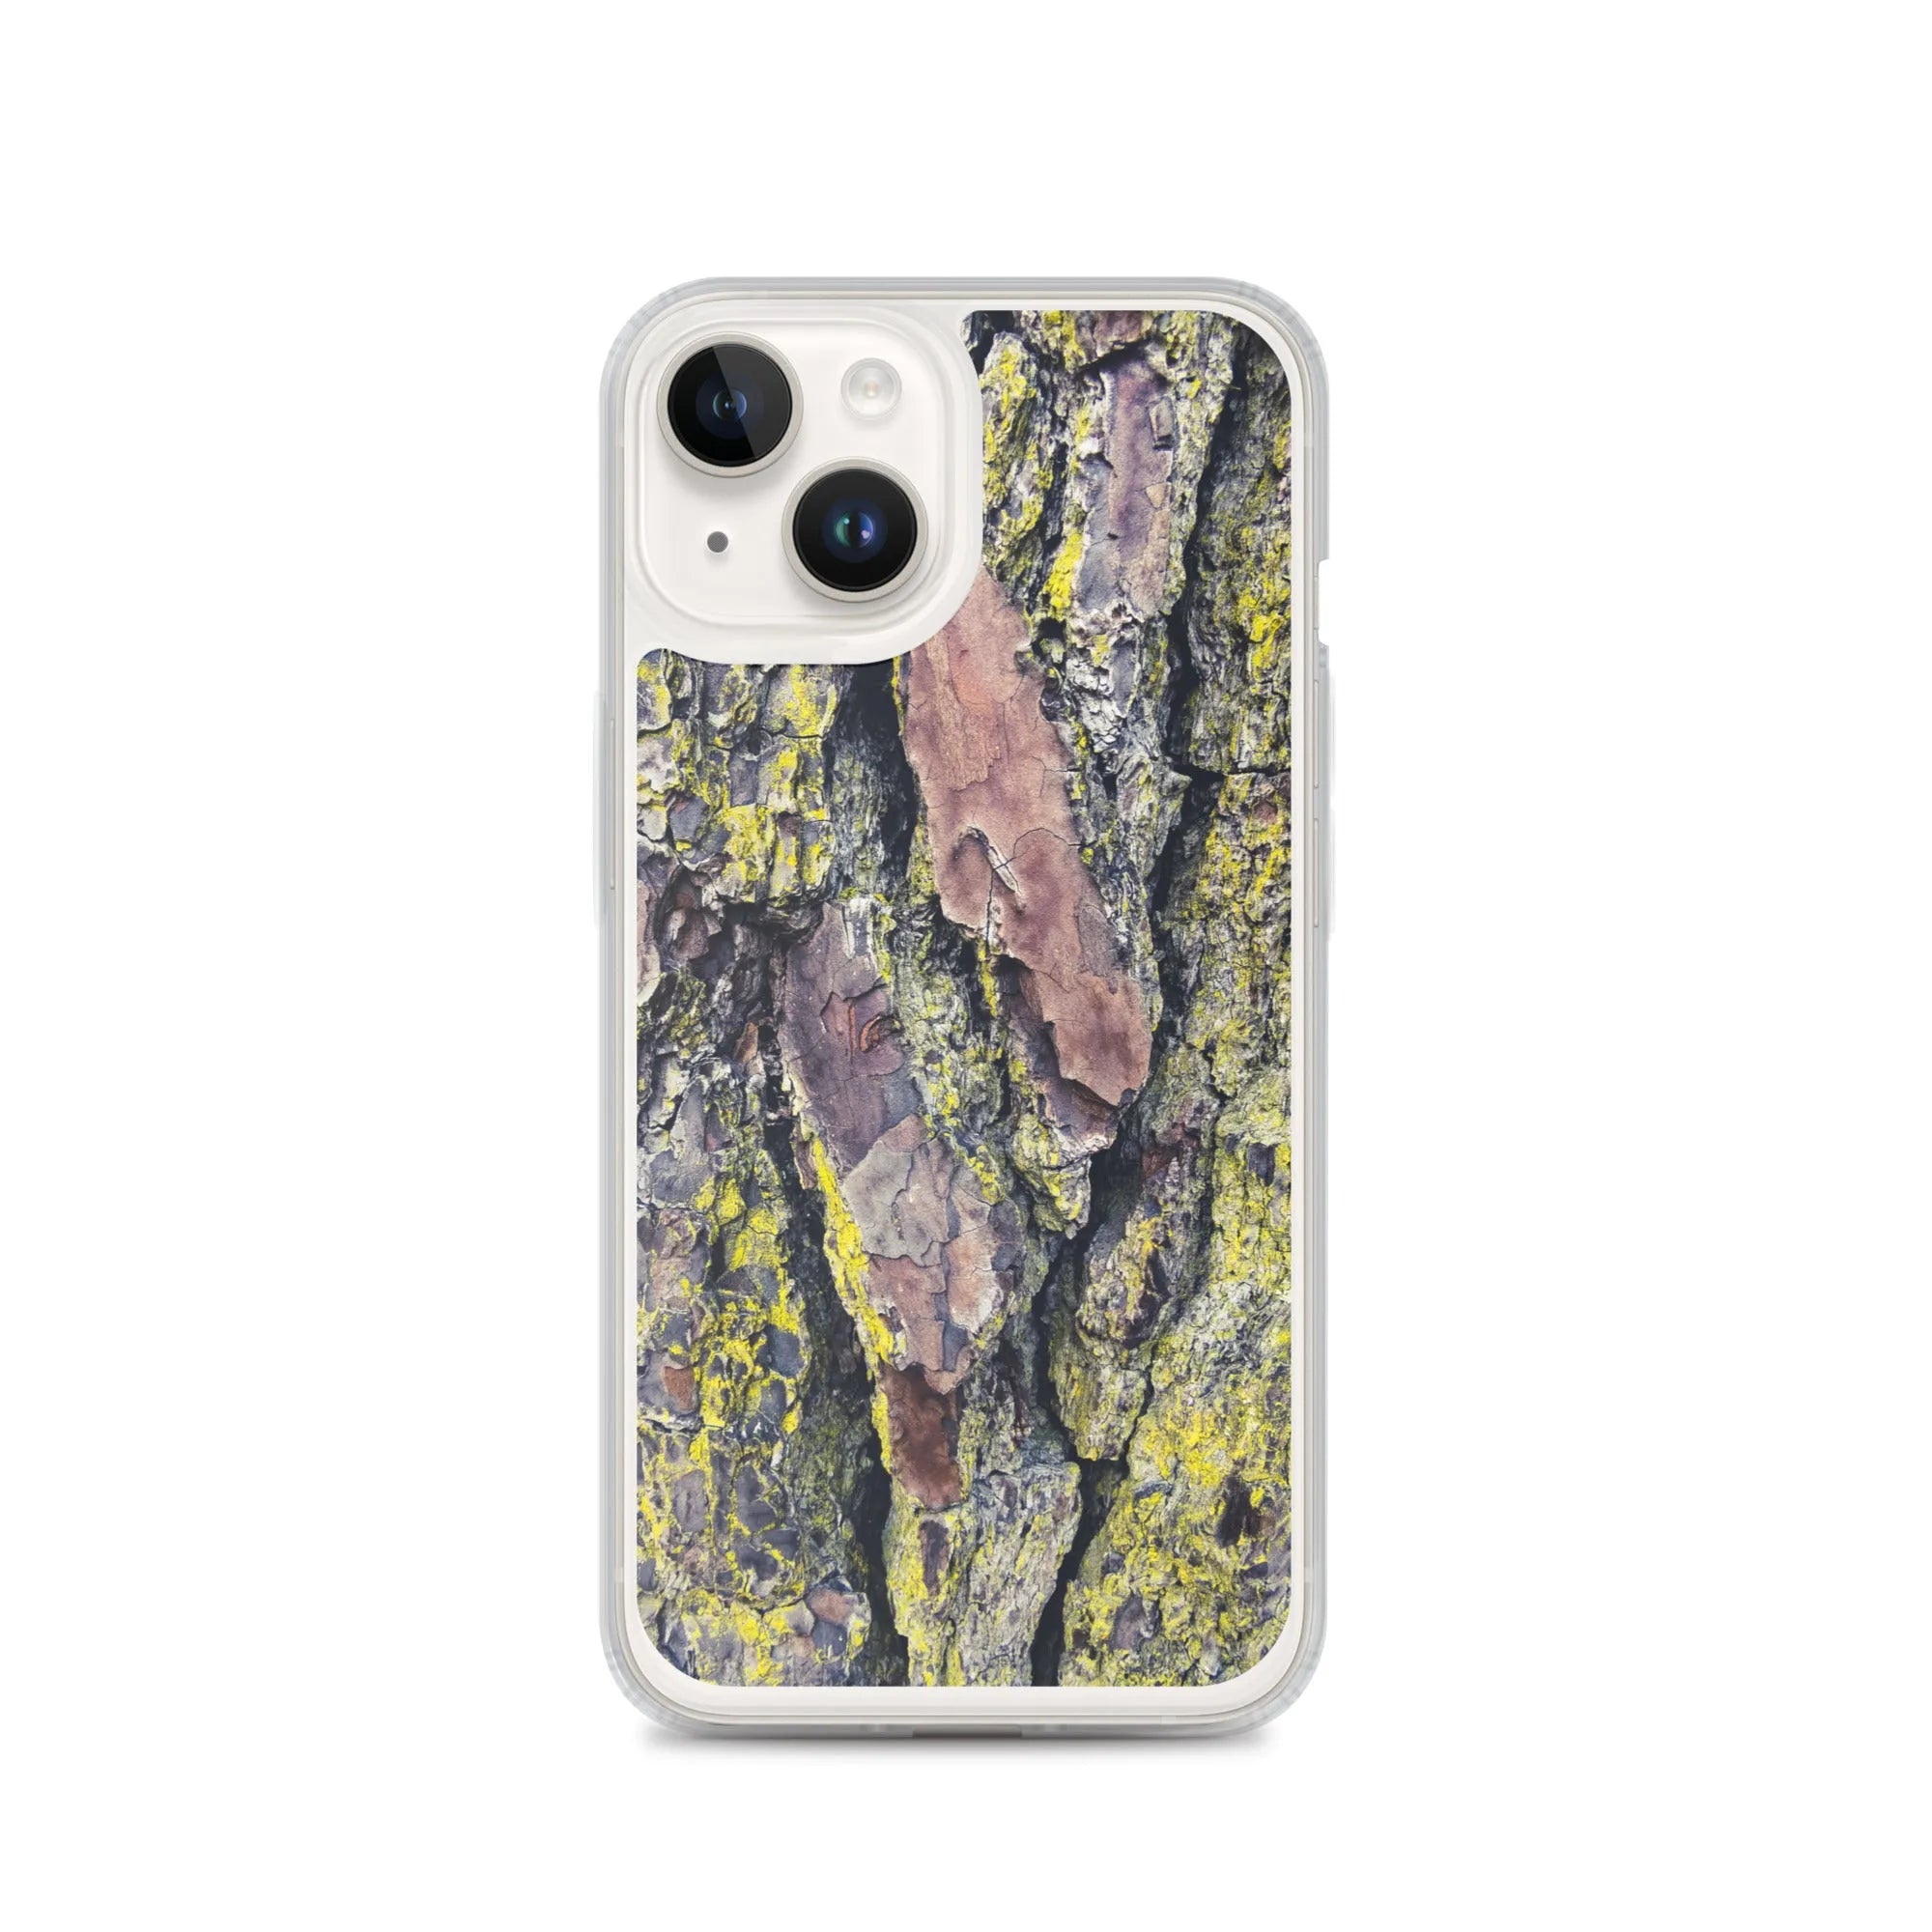 Barking Mad 2 + Too - Botanical Art Pattern Iphone Case - Iphone 14 - Mobile Phone Cases - Aesthetic Art